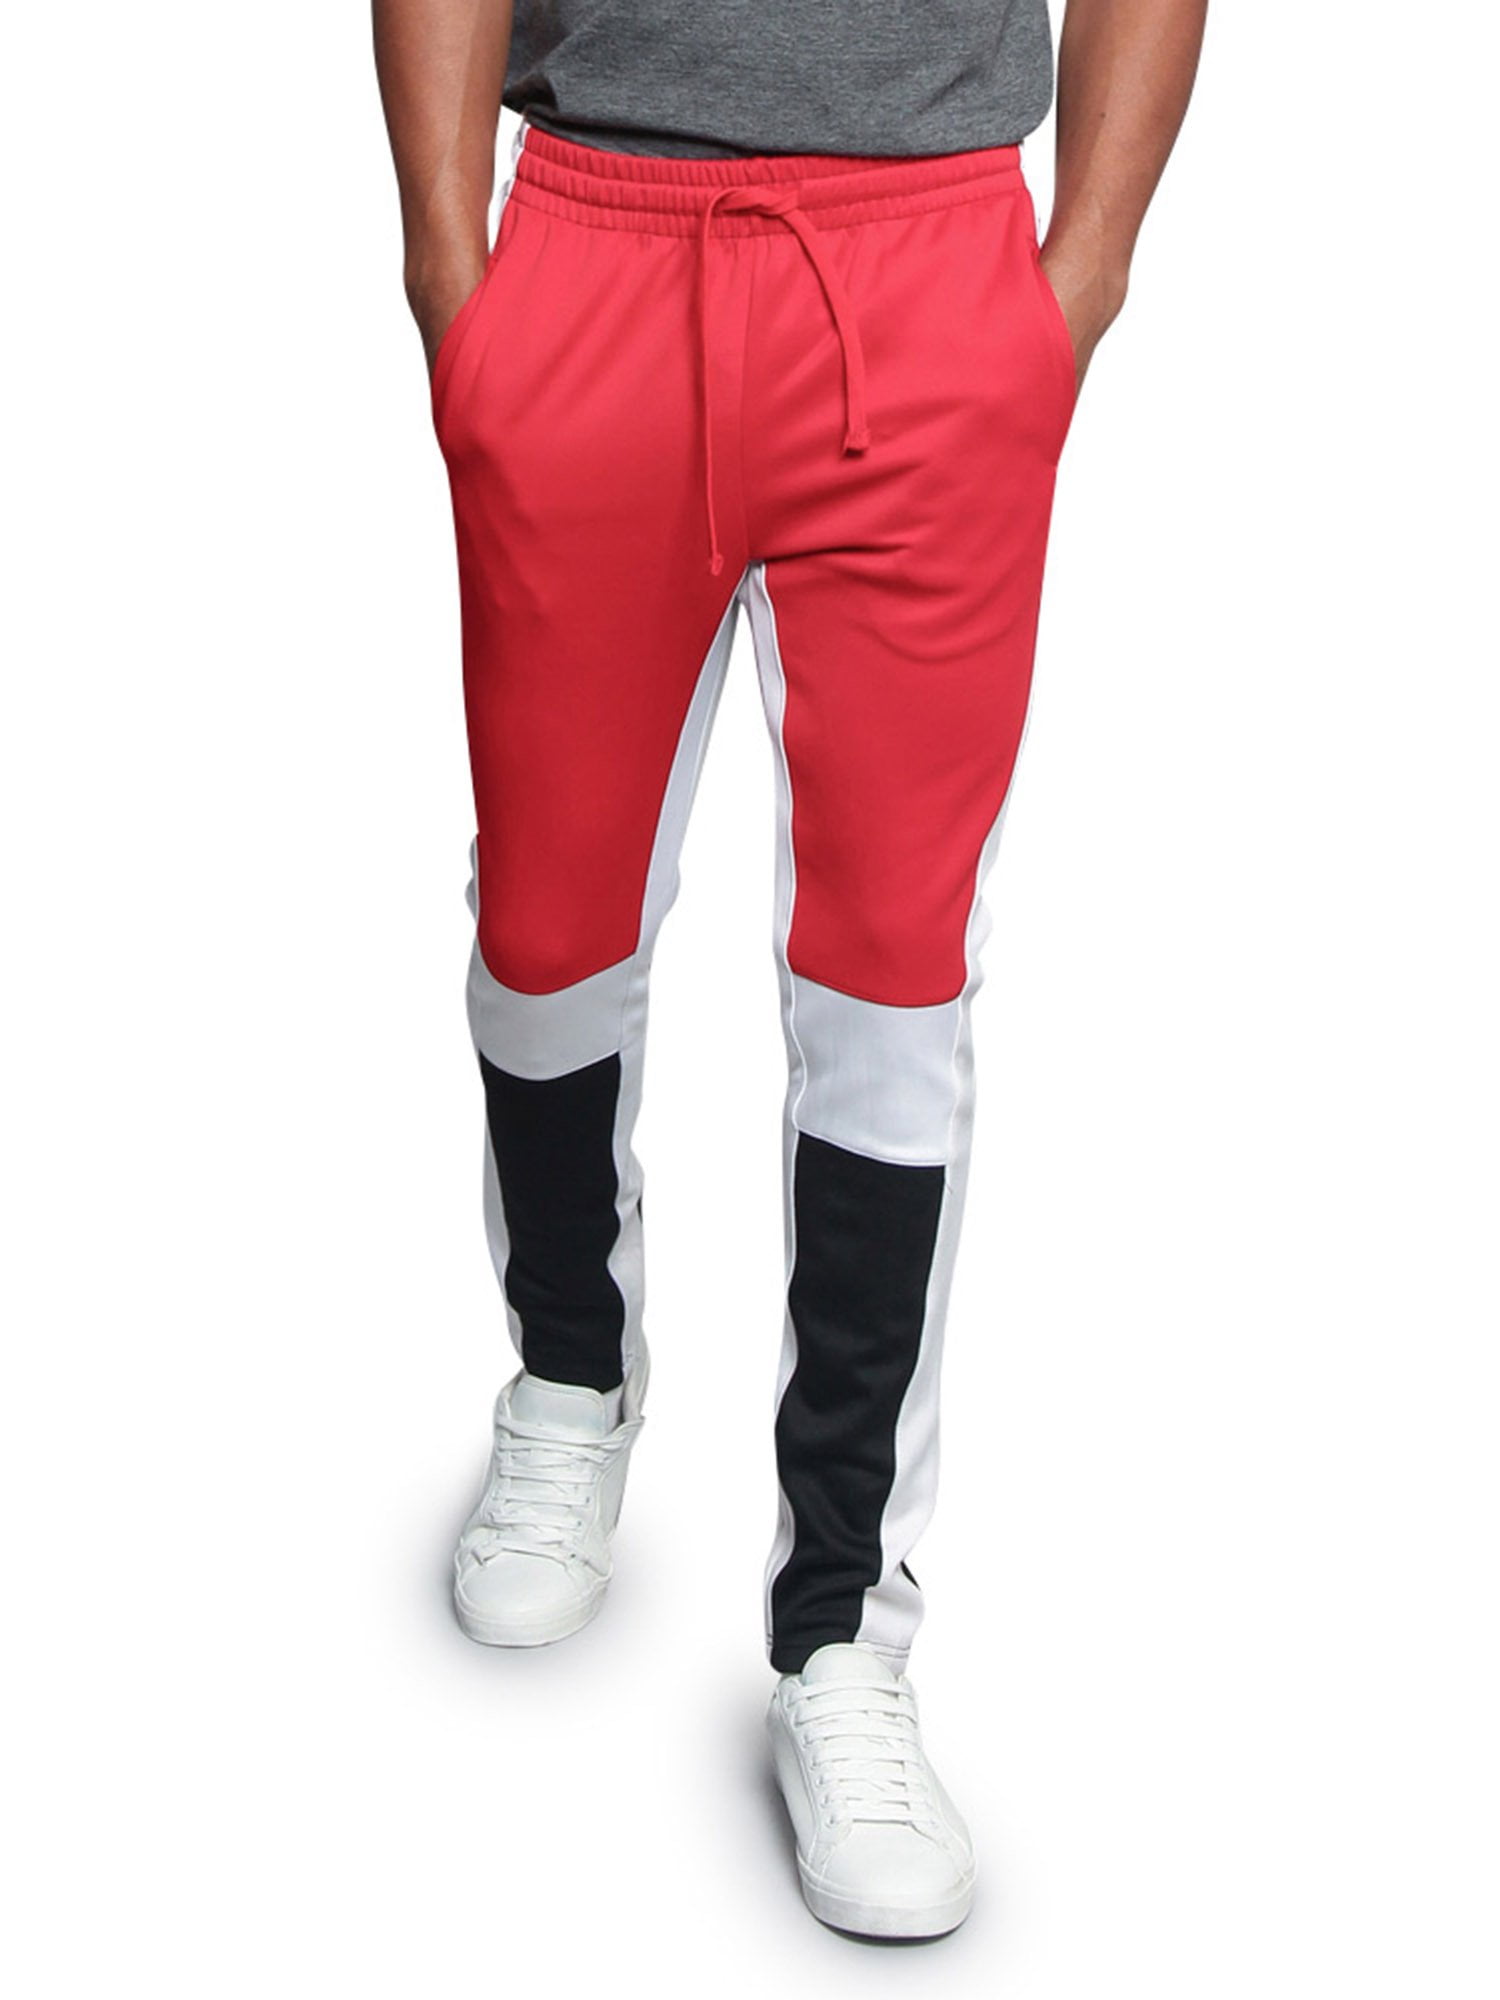 Medium red/Gold Southpole Boys Big Athletic Track Pants Open Bottom 